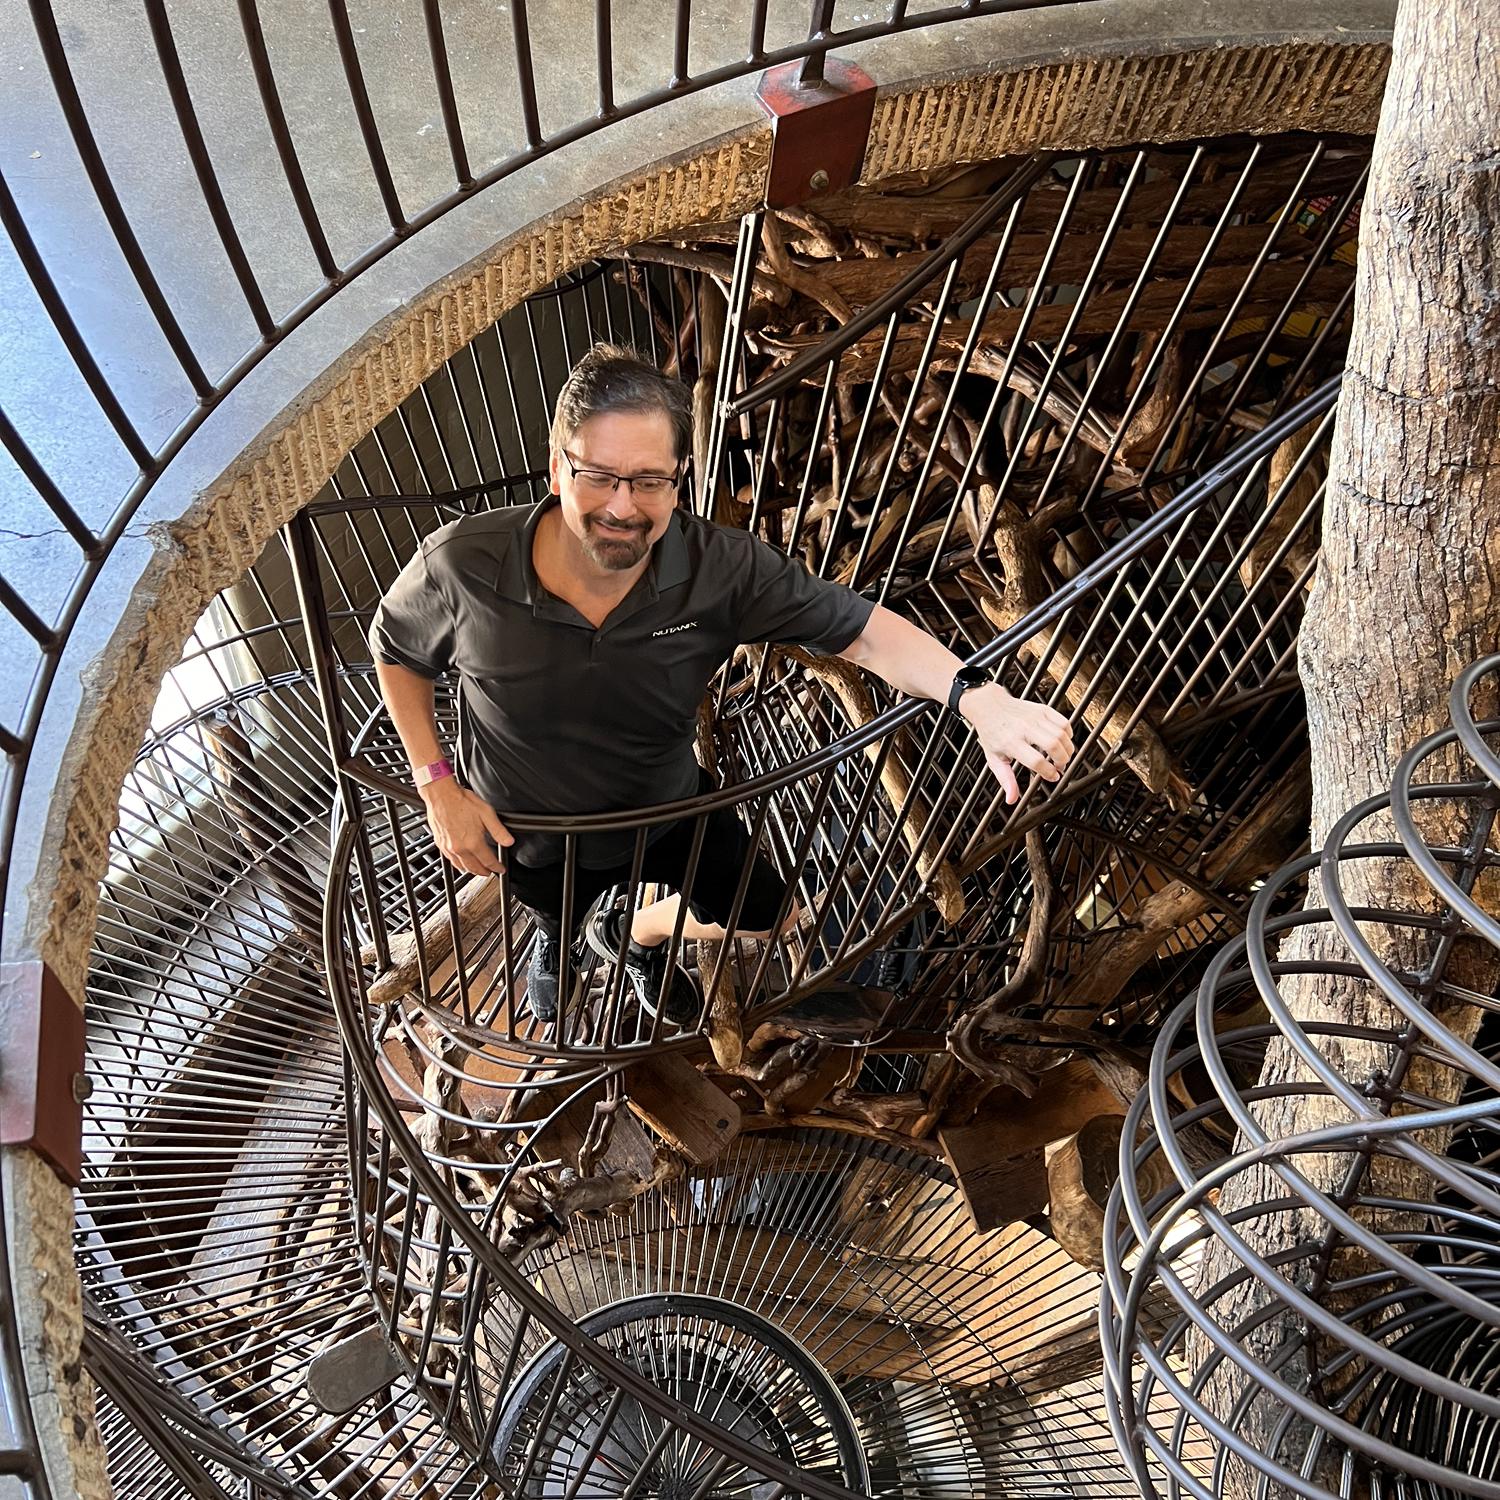 Jon heading down a spiral staircase at the City Museum in Missouri